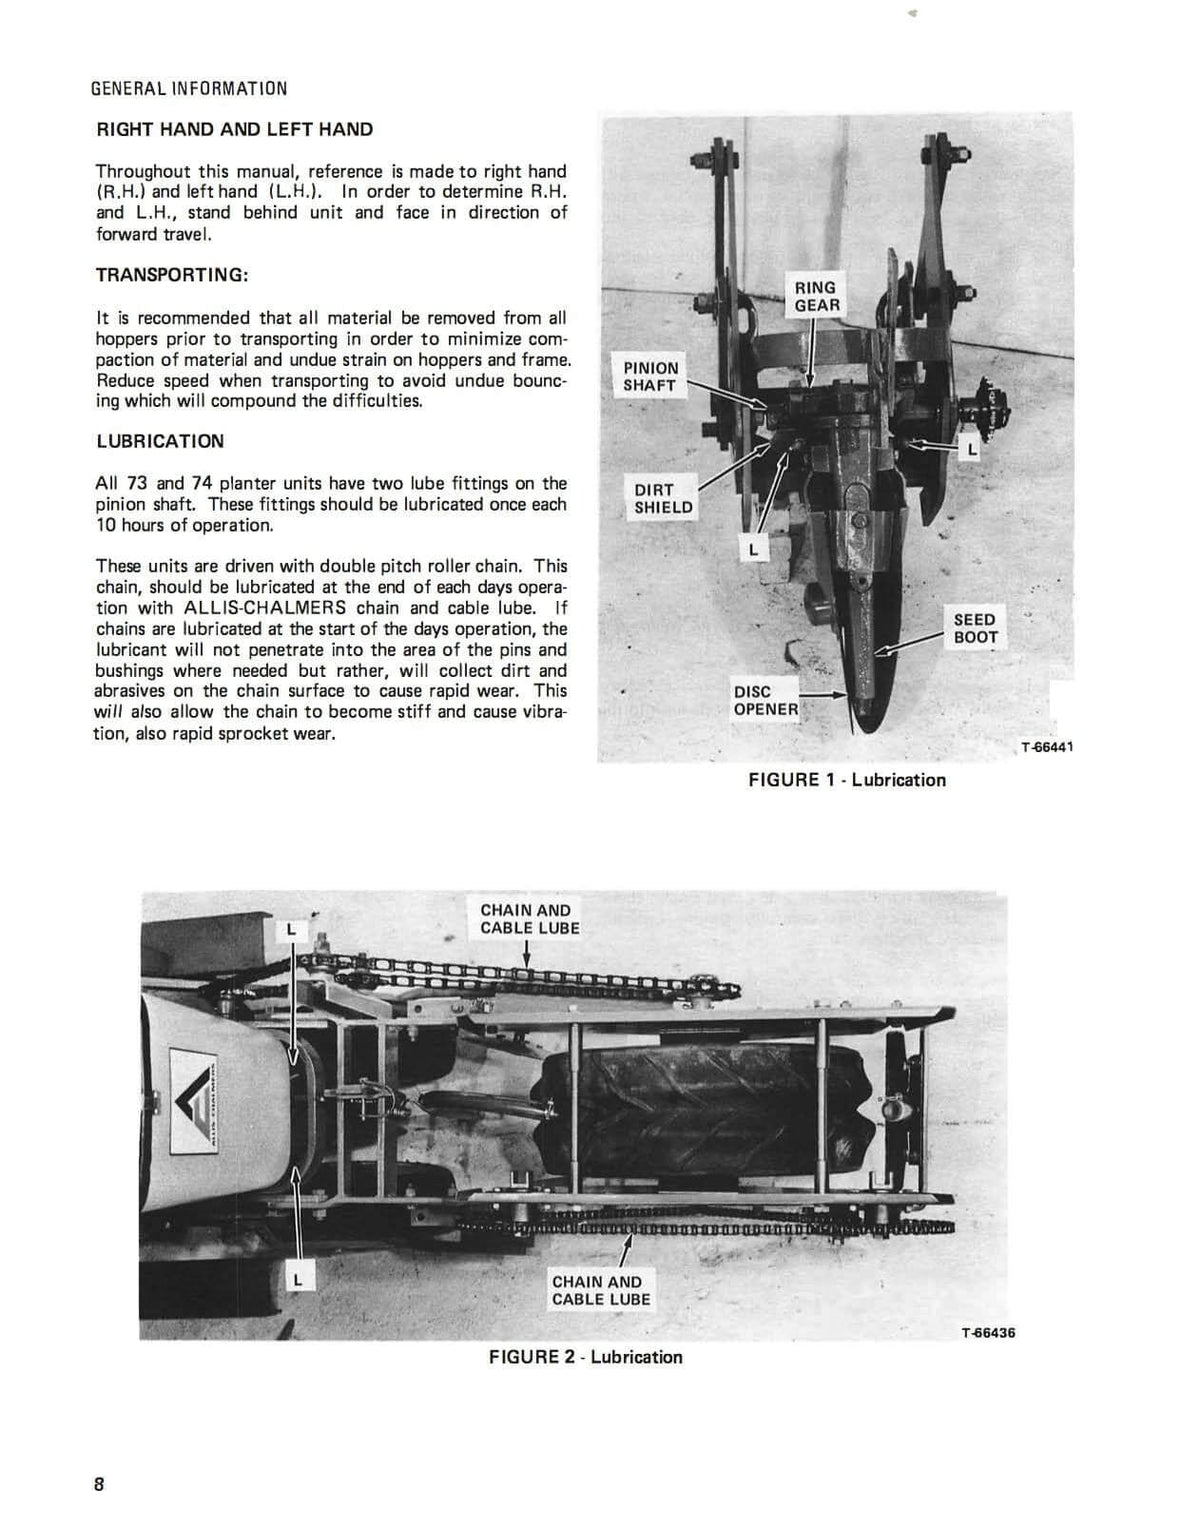 Allis-Chalmers 73 and 74 Series Planting Units Operator's Manual